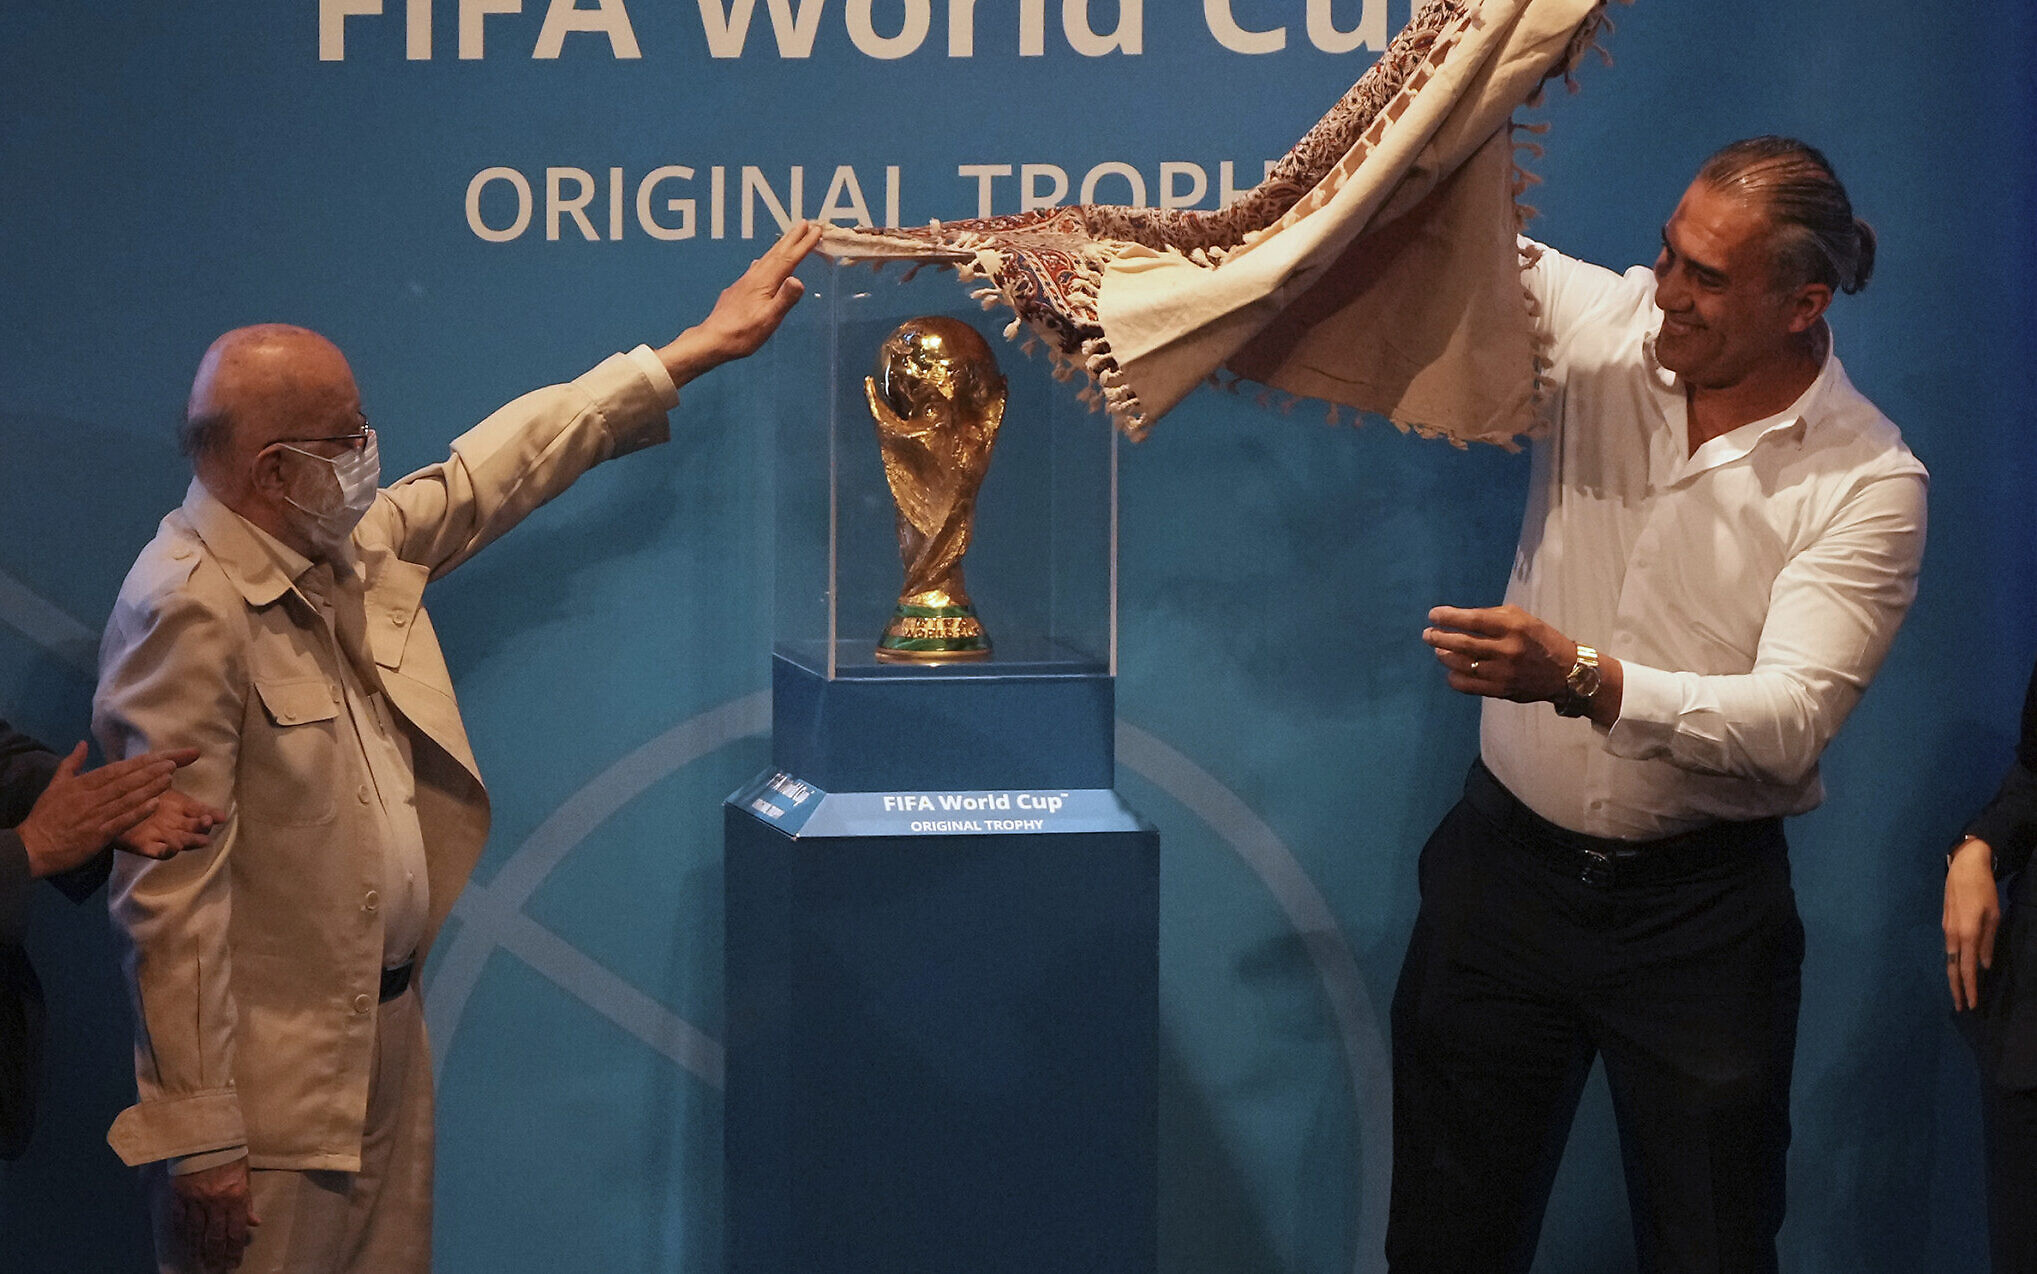 Qatari sheikh behind giant replica of World Cup trophy urges ties with  Israel